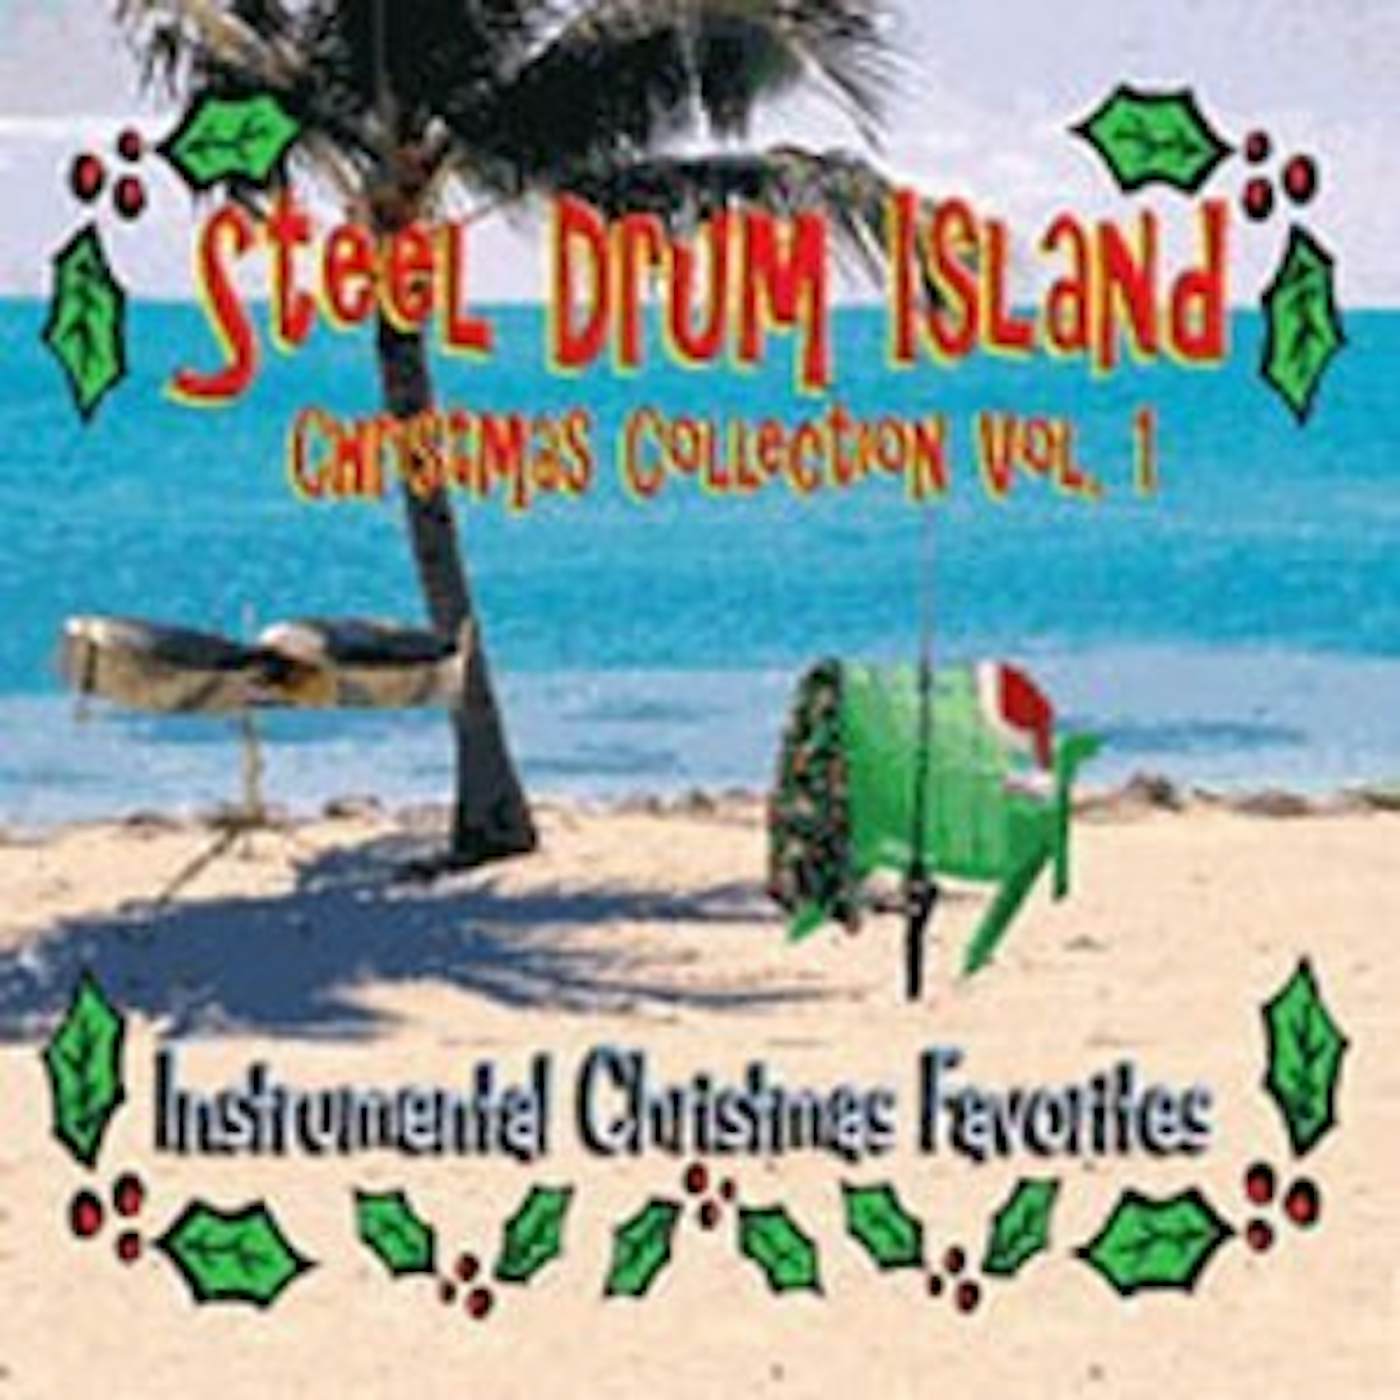 STEEL DRUM ISLAND CHRISTMAS COLLECTION CD